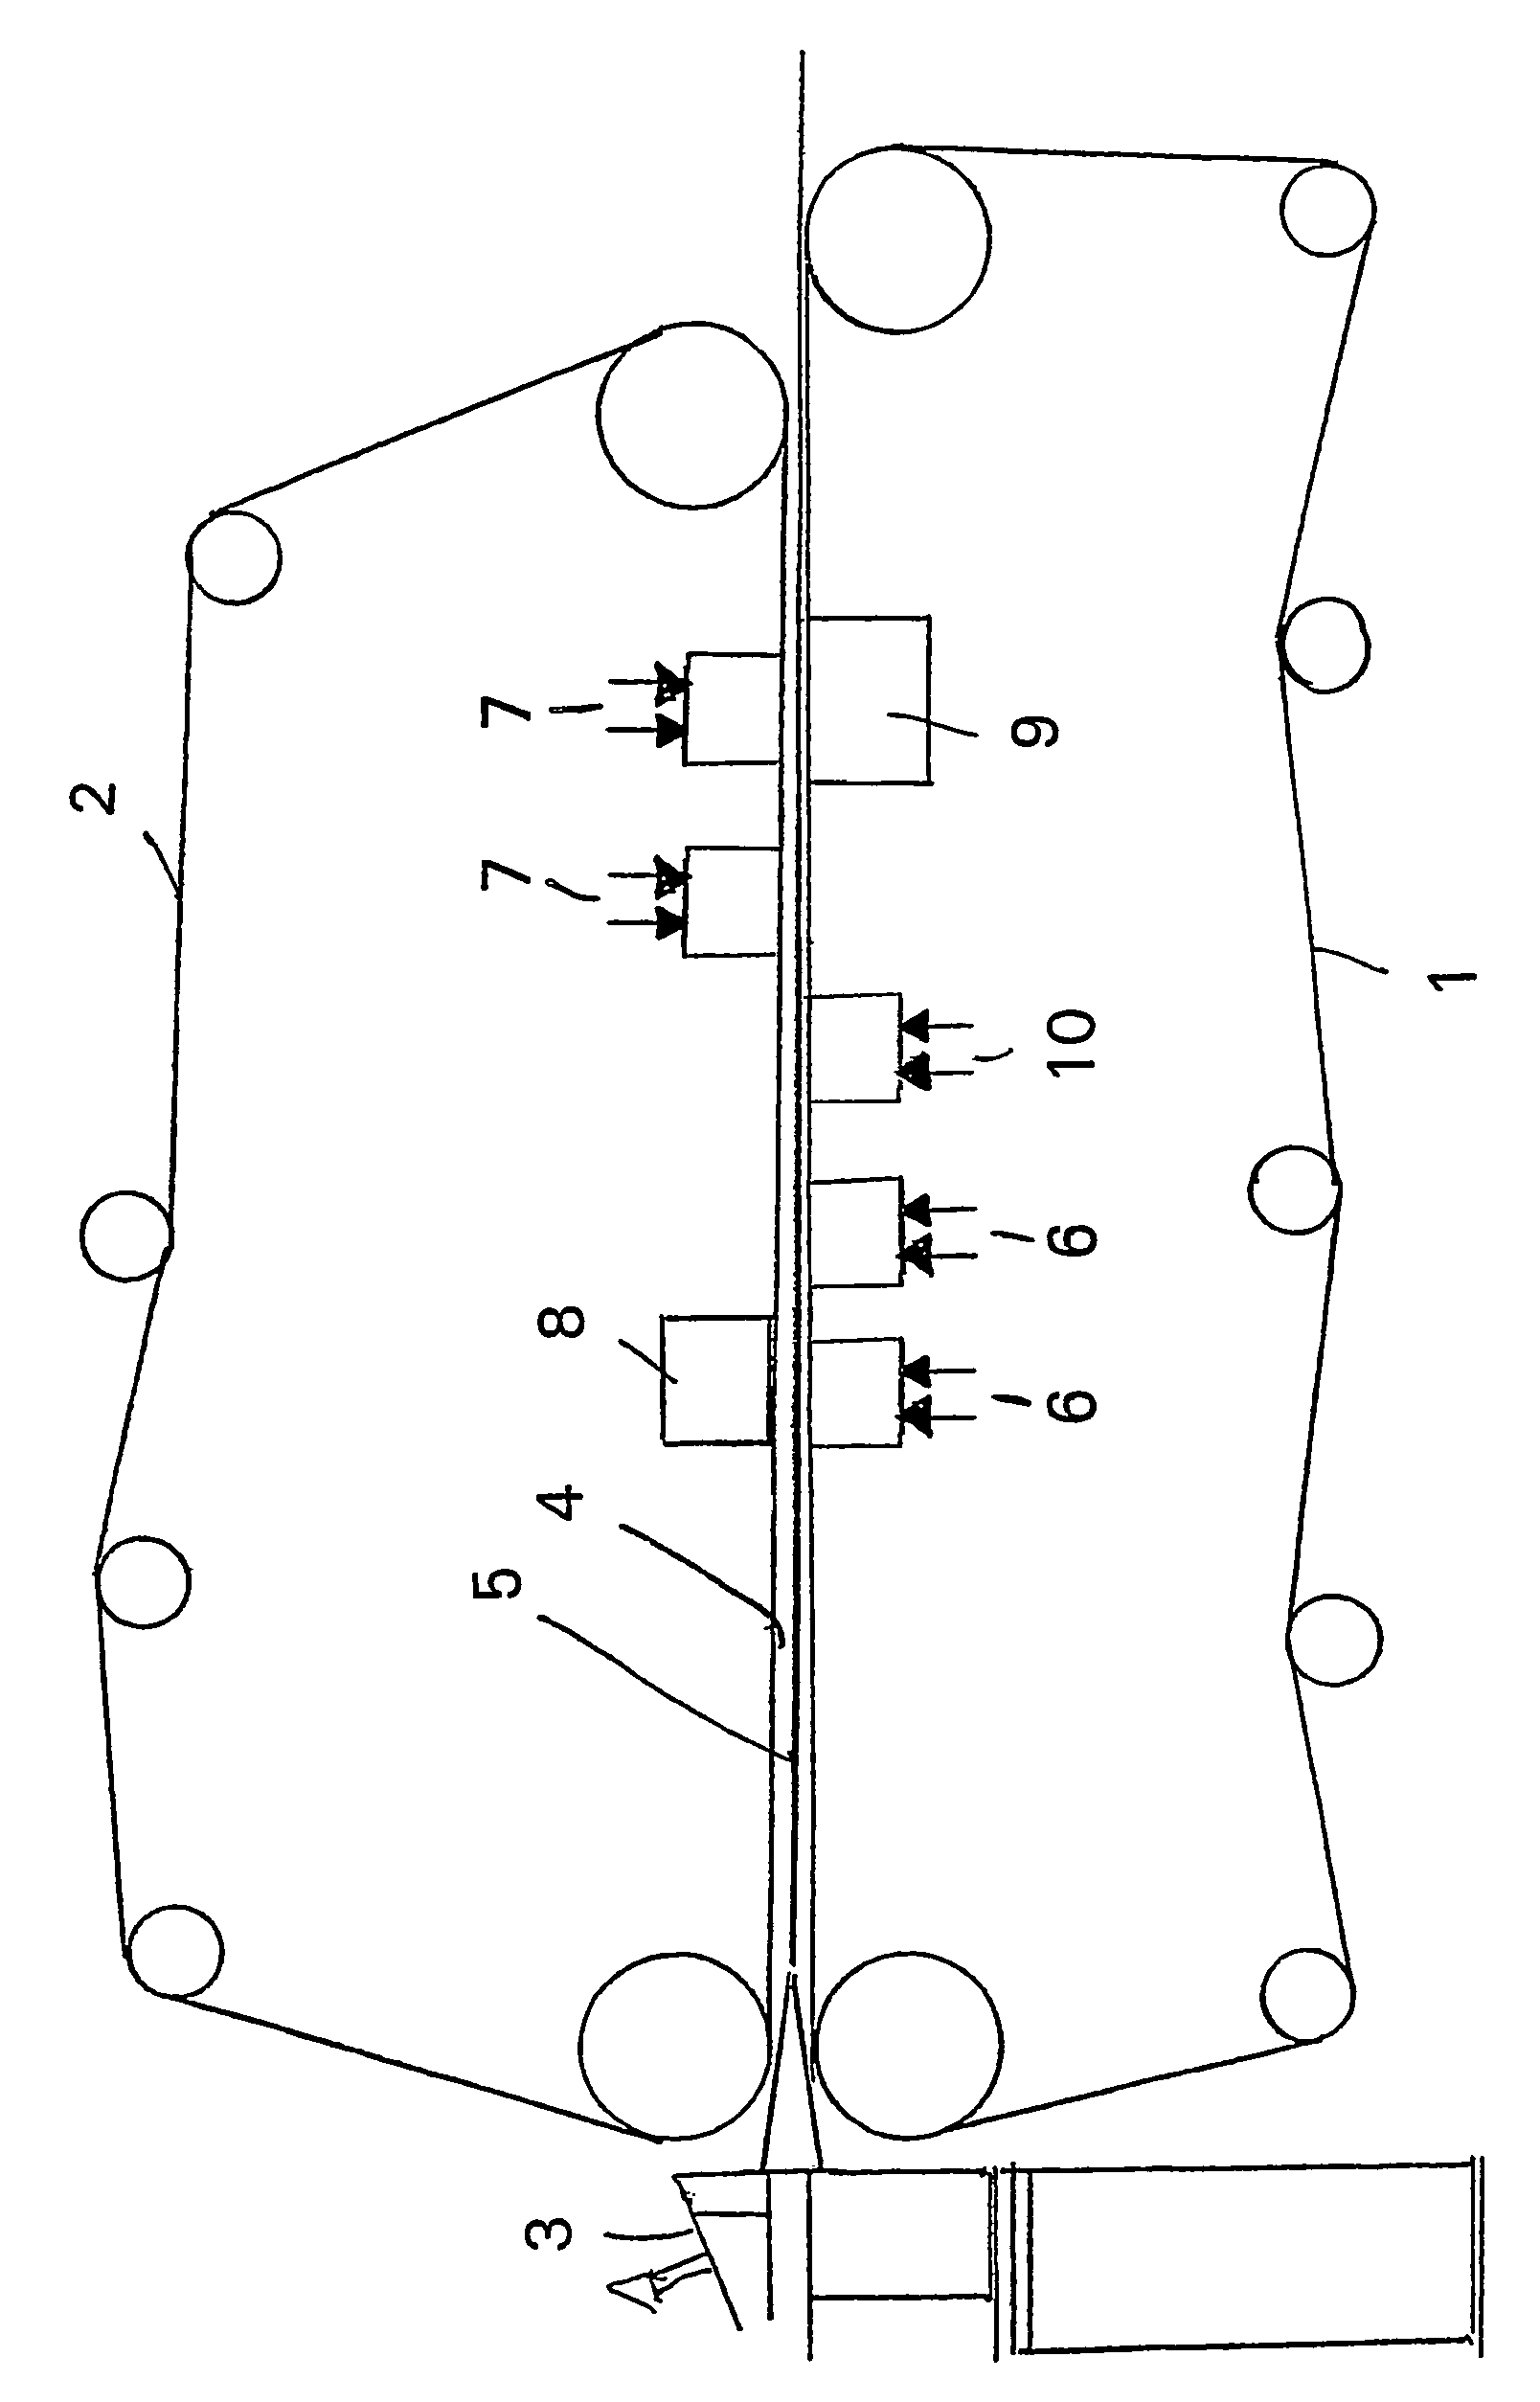 Method for controlling the temperature of a cellulosic web entering a dryer